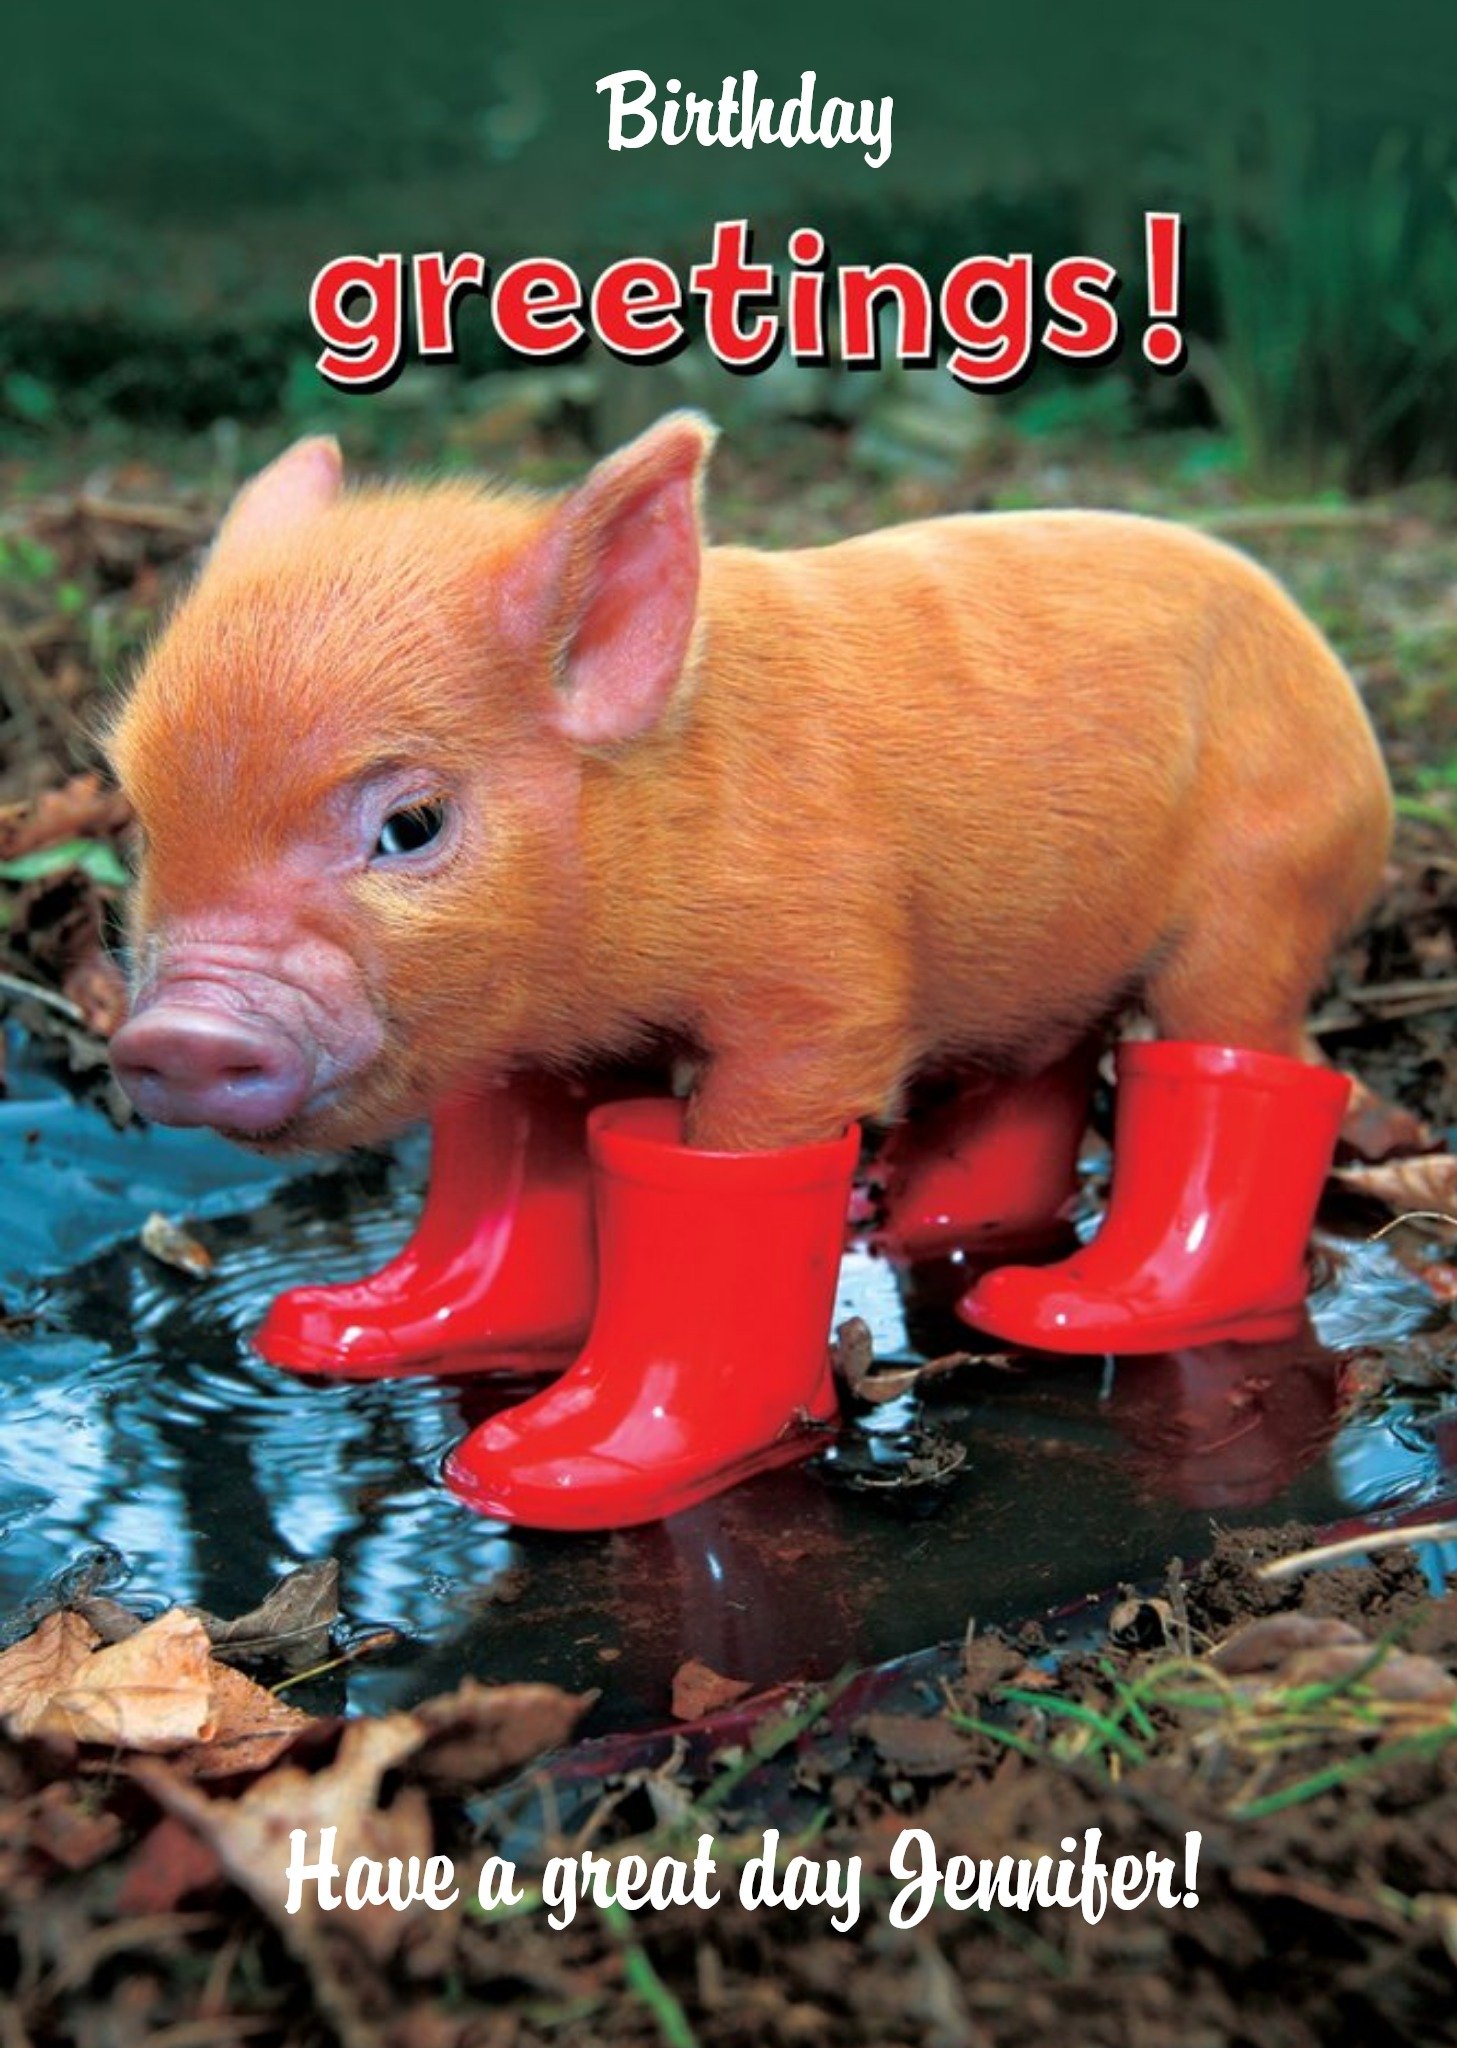 Moonpig Little Pig In Boots Personalised Birthday Greetings Card, Large